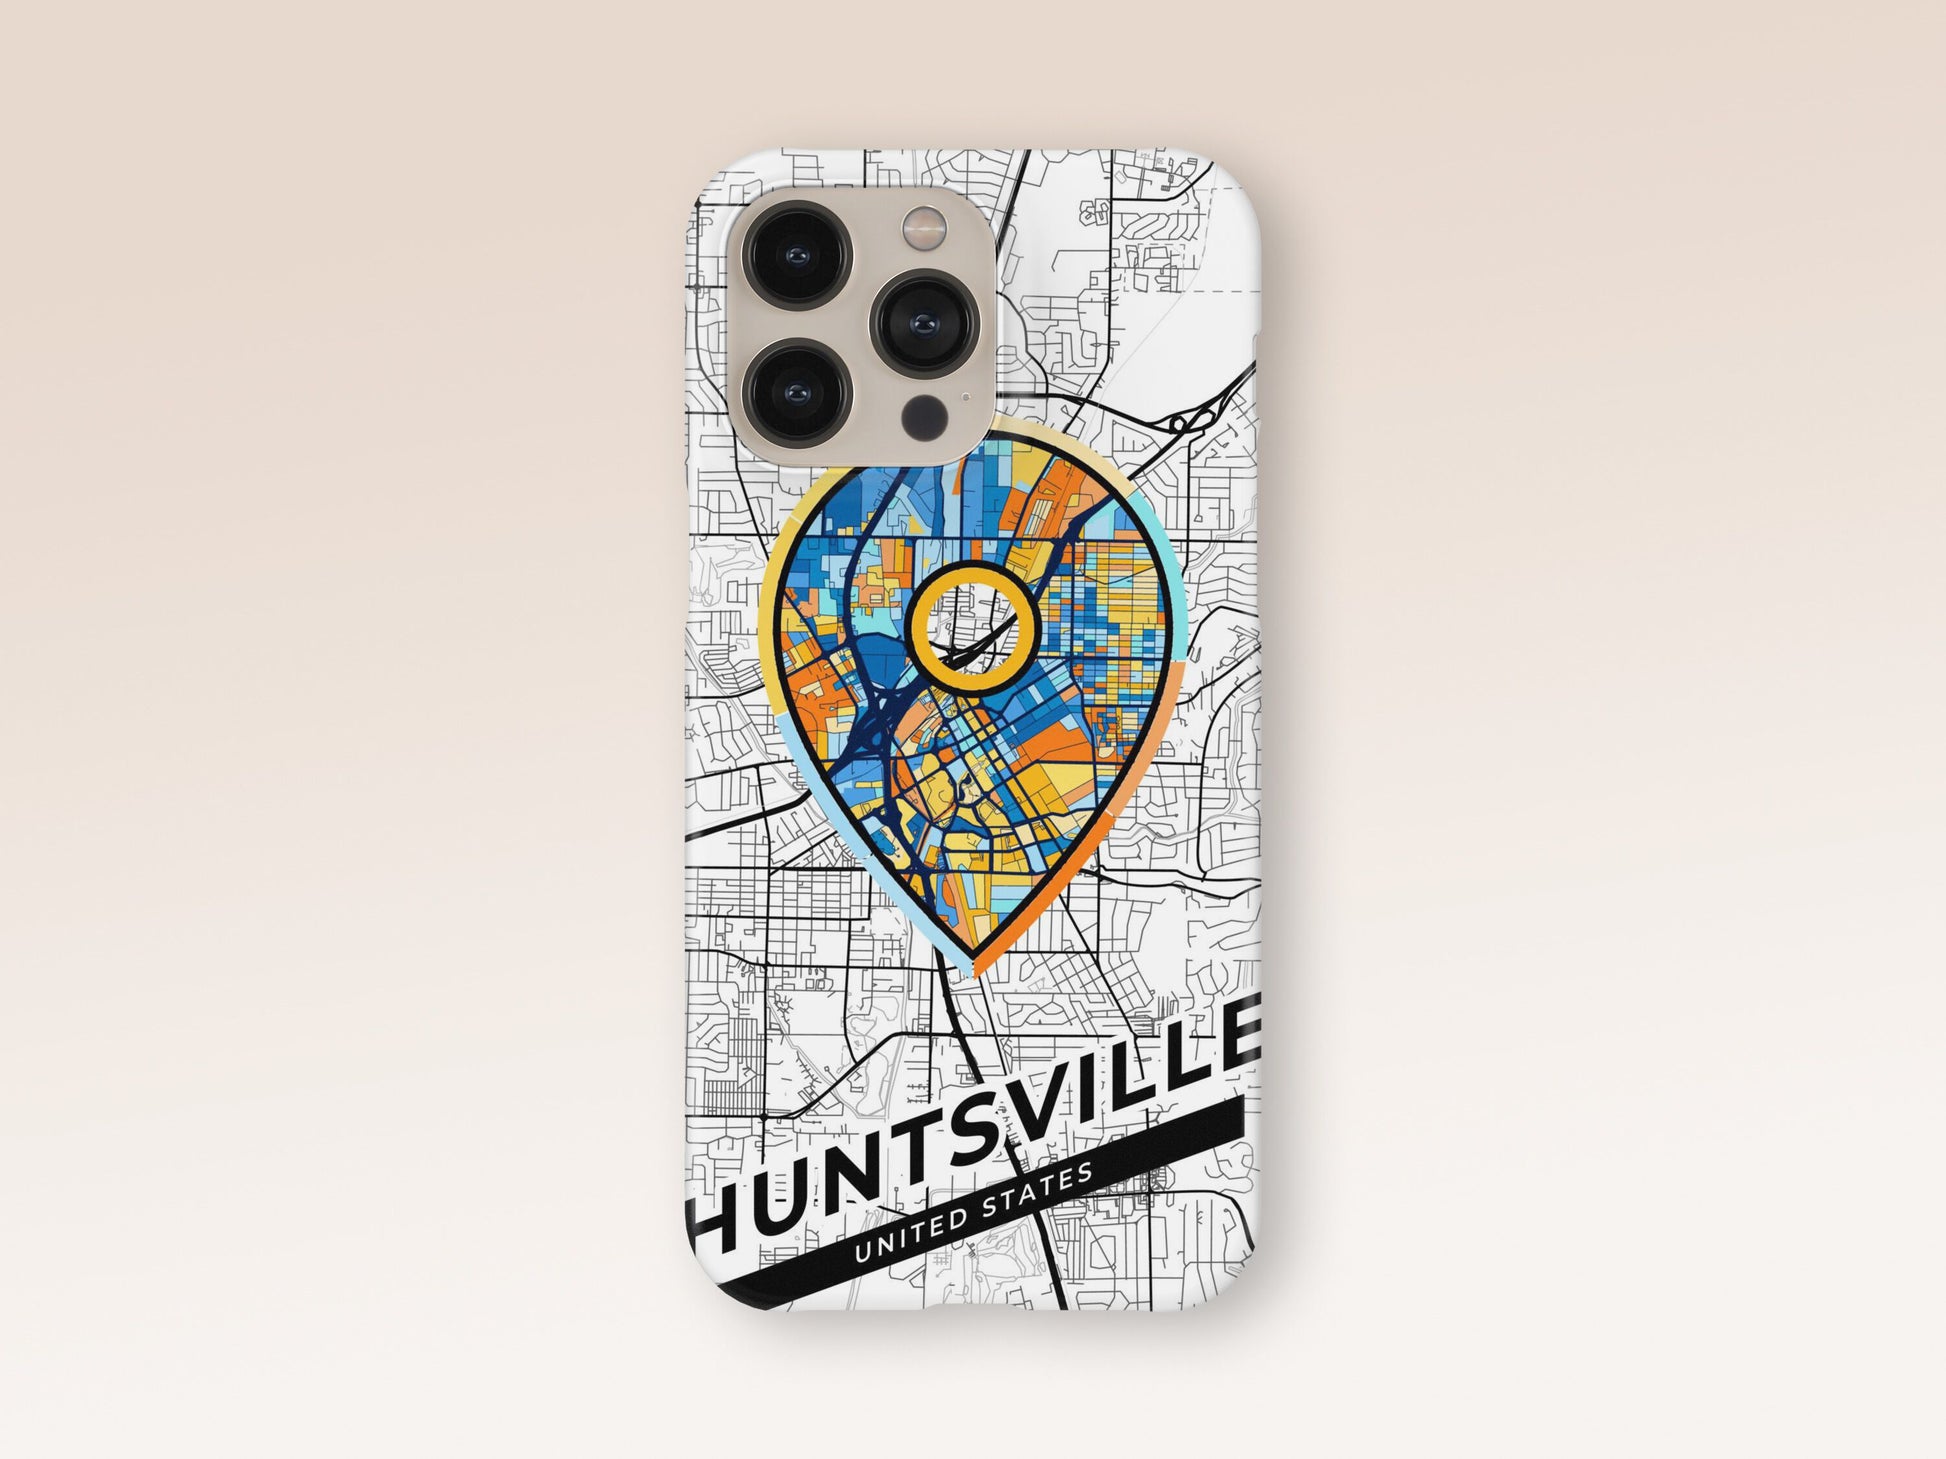 Huntsville Alabama slim phone case with colorful icon. Birthday, wedding or housewarming gift. Couple match cases. 1